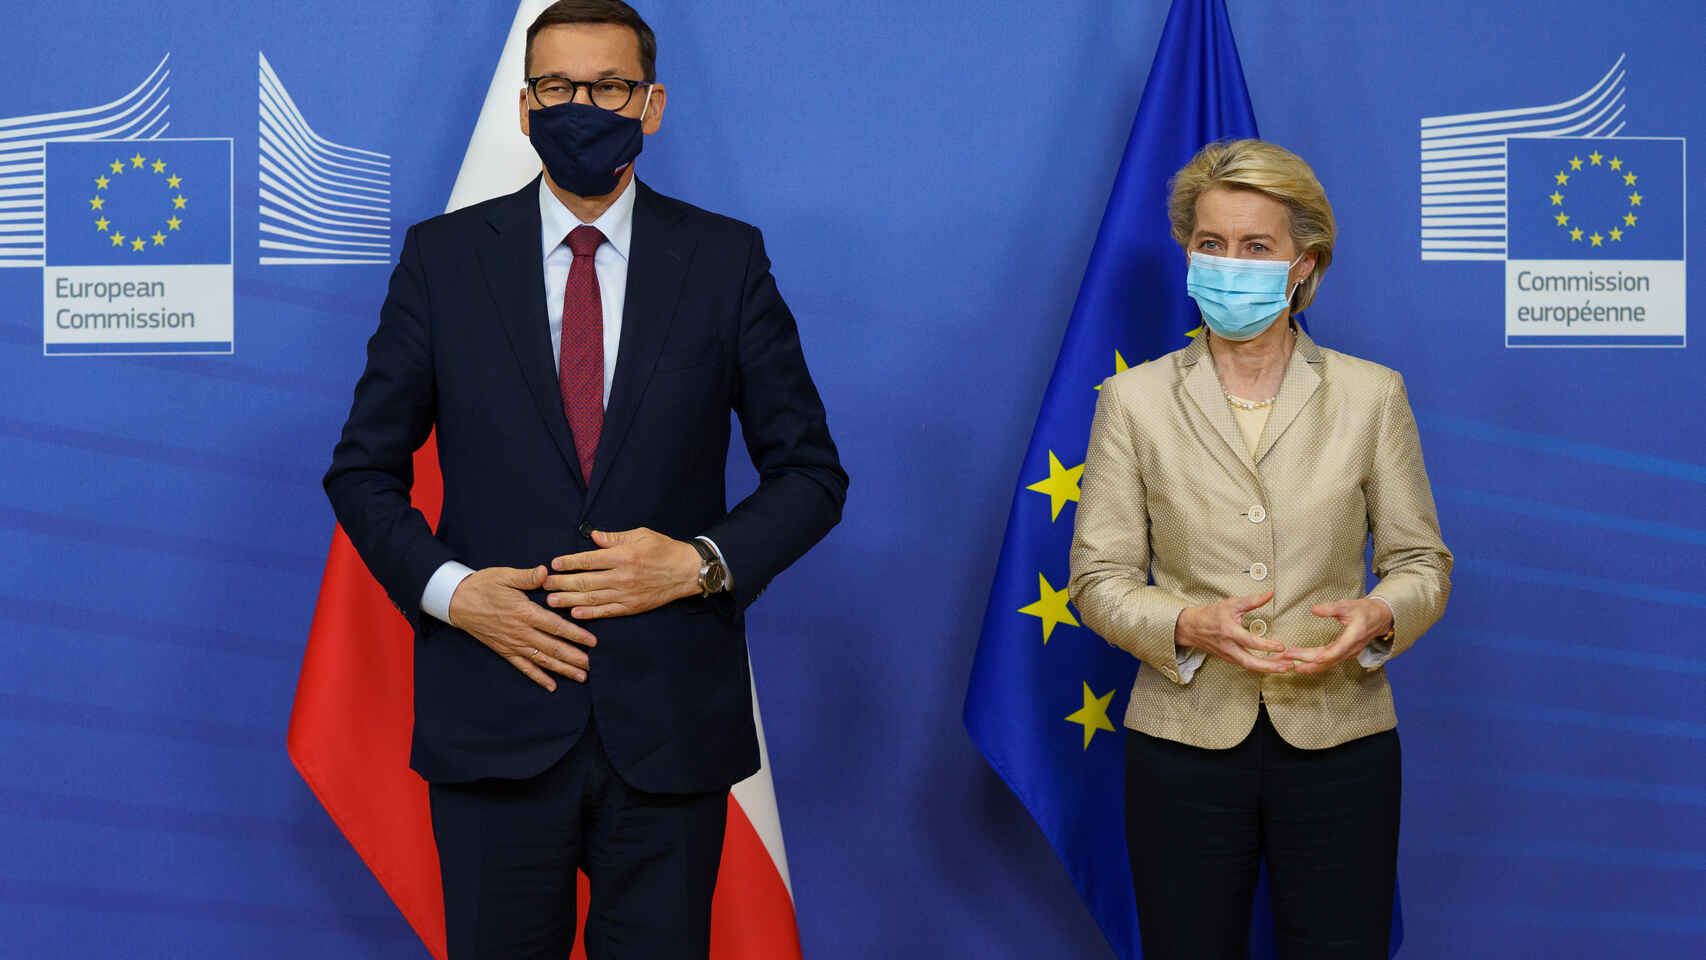 A man and a woman, standing, pose with the flag of the European Union and Poland behind them.